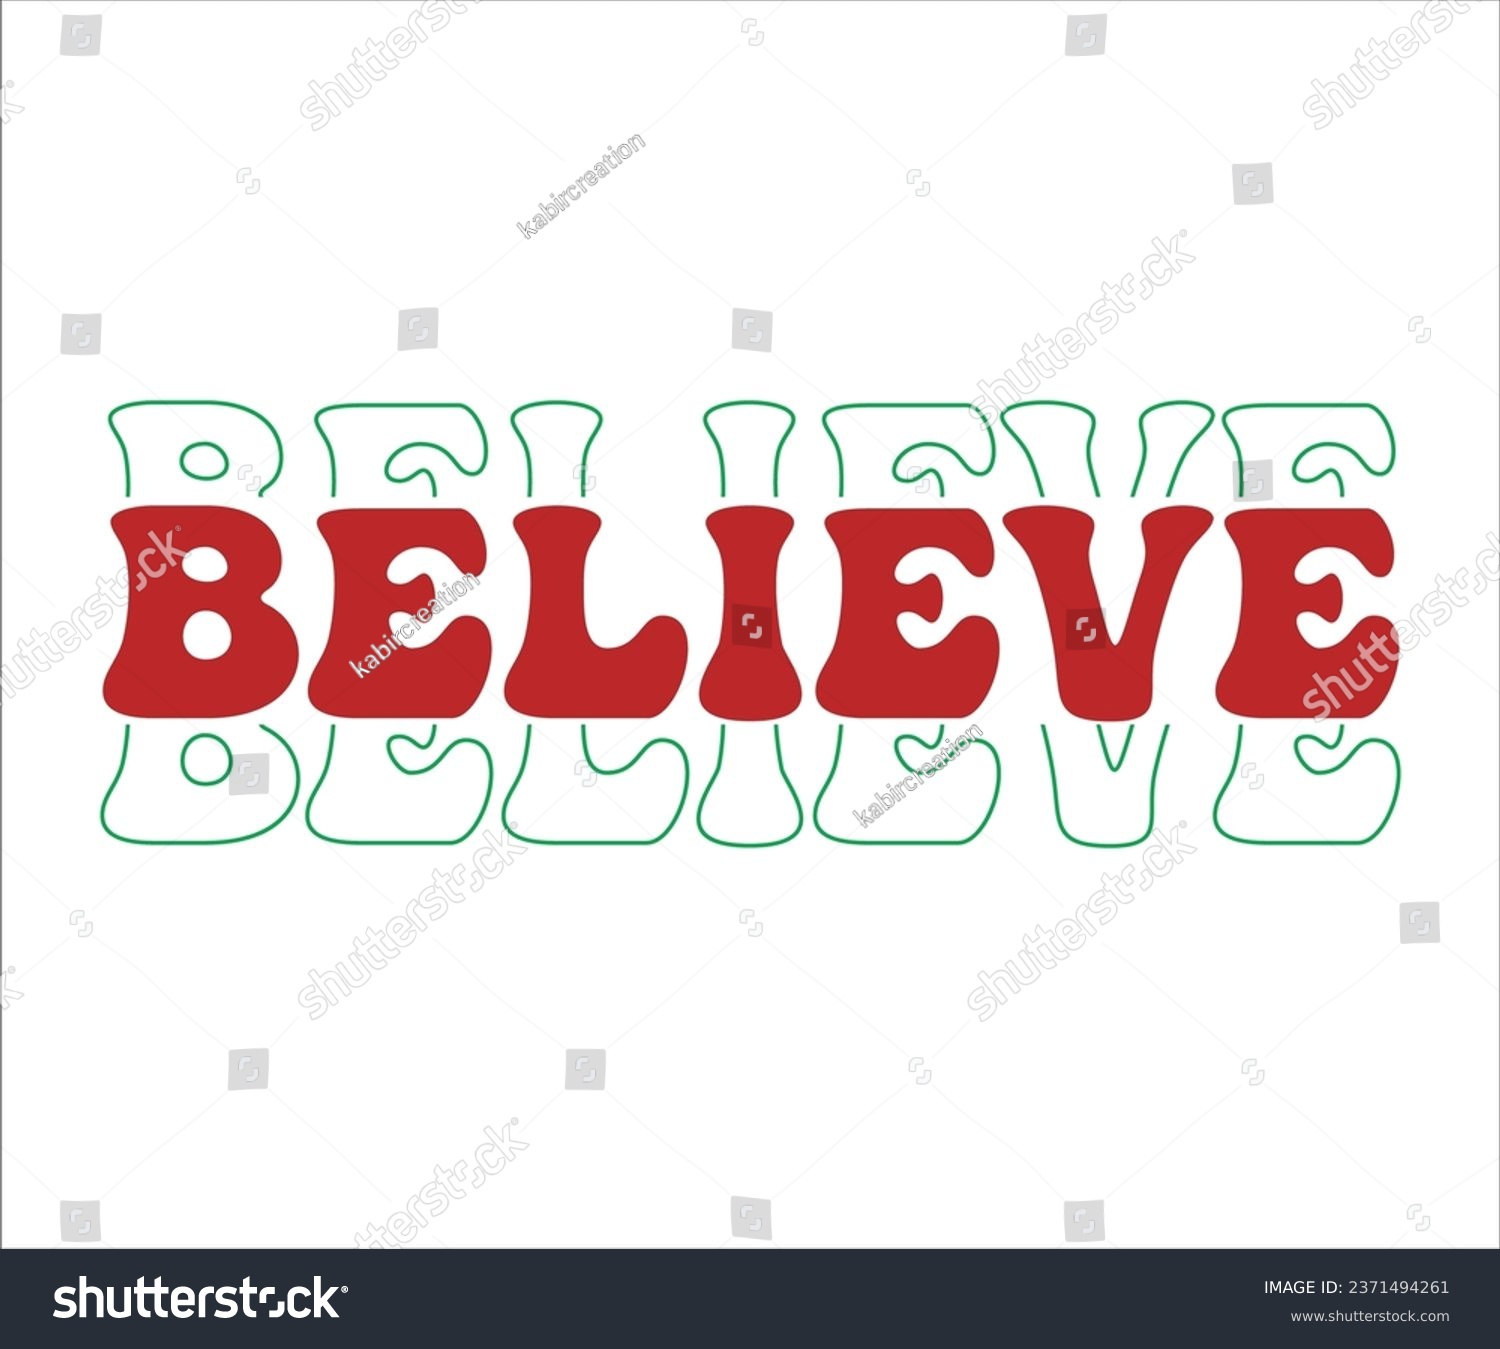 SVG of Believe SVG, Retro Christmas T-shirt, Funny Christmas Quotes, Merry Christmas Saying SVG, Holiday Saying SVG, New Year Quotes, Winter Quotes SVG, Cut File for Cricut svg